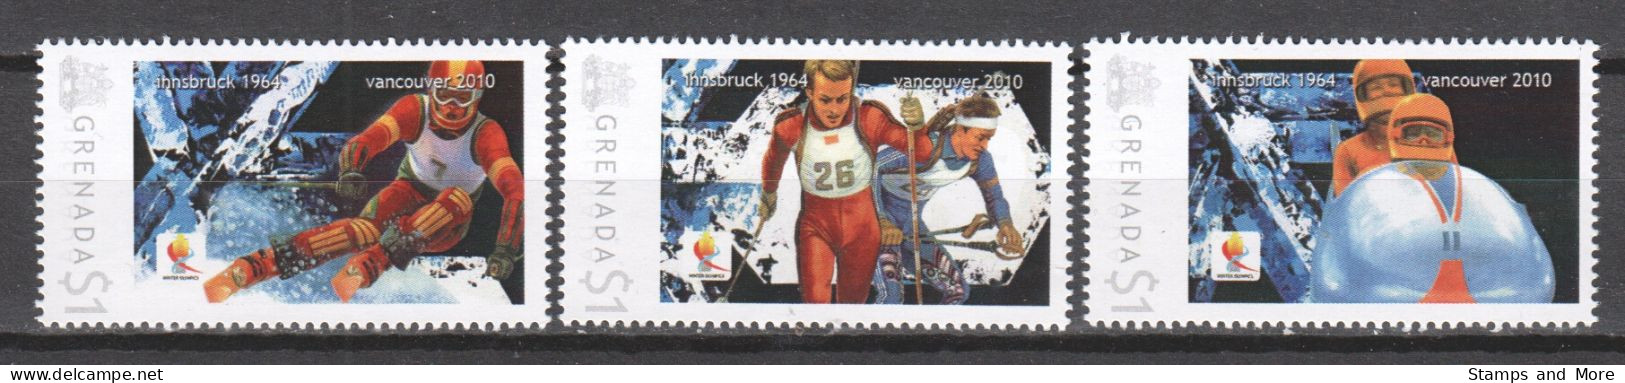 Grenada - Limited Edition Serie 09 MNH - WINTER OLYMPICS VANCOUVER 2010 - INNSBRUCK 1964 - Hiver 2010: Vancouver